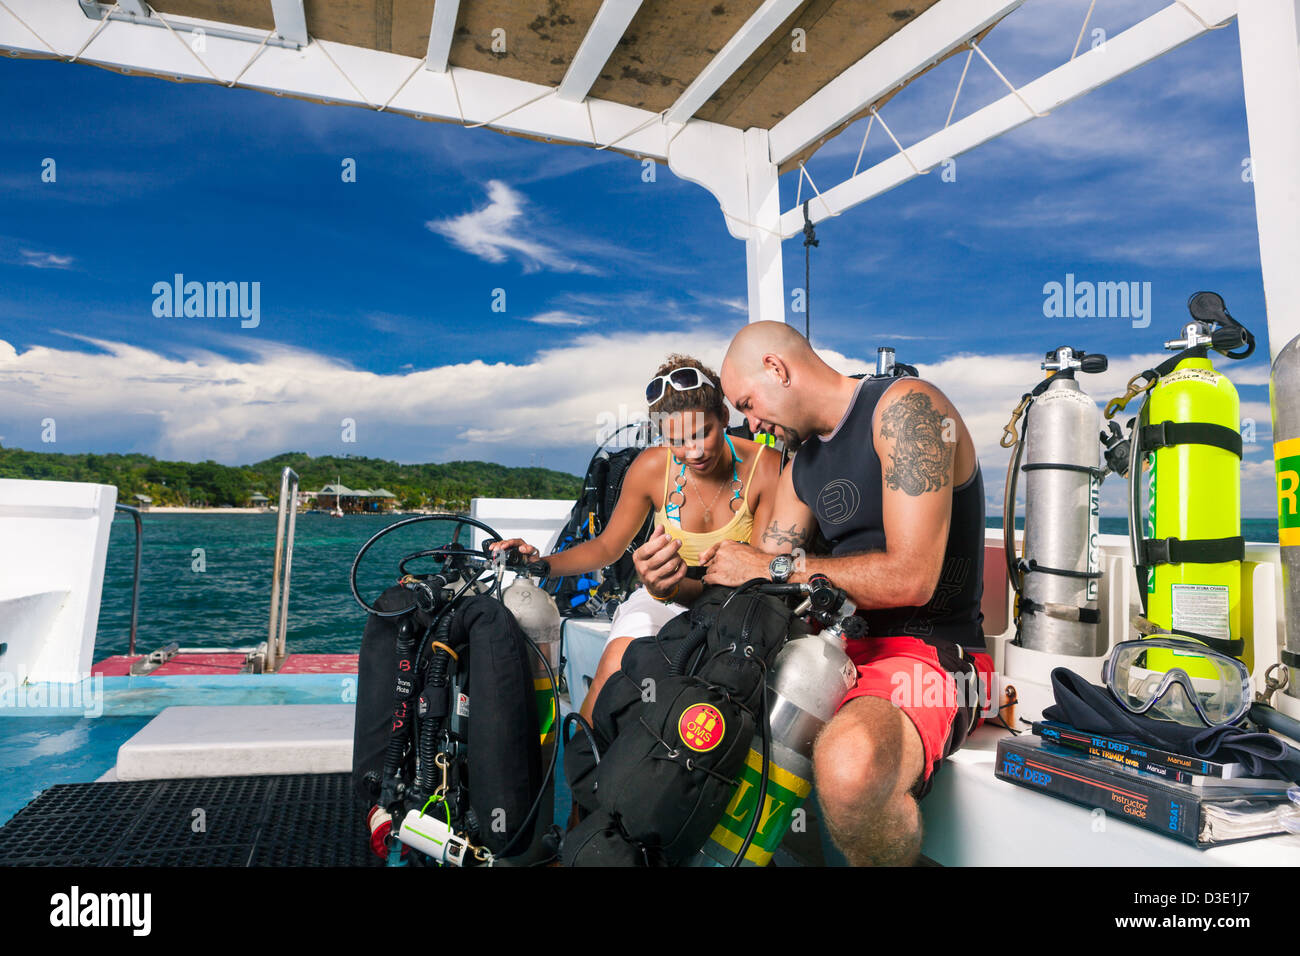 Two scuba divers review dive plan and check technical equipment on boat before starting tec dive. Roatan, Honduras Stock Photo